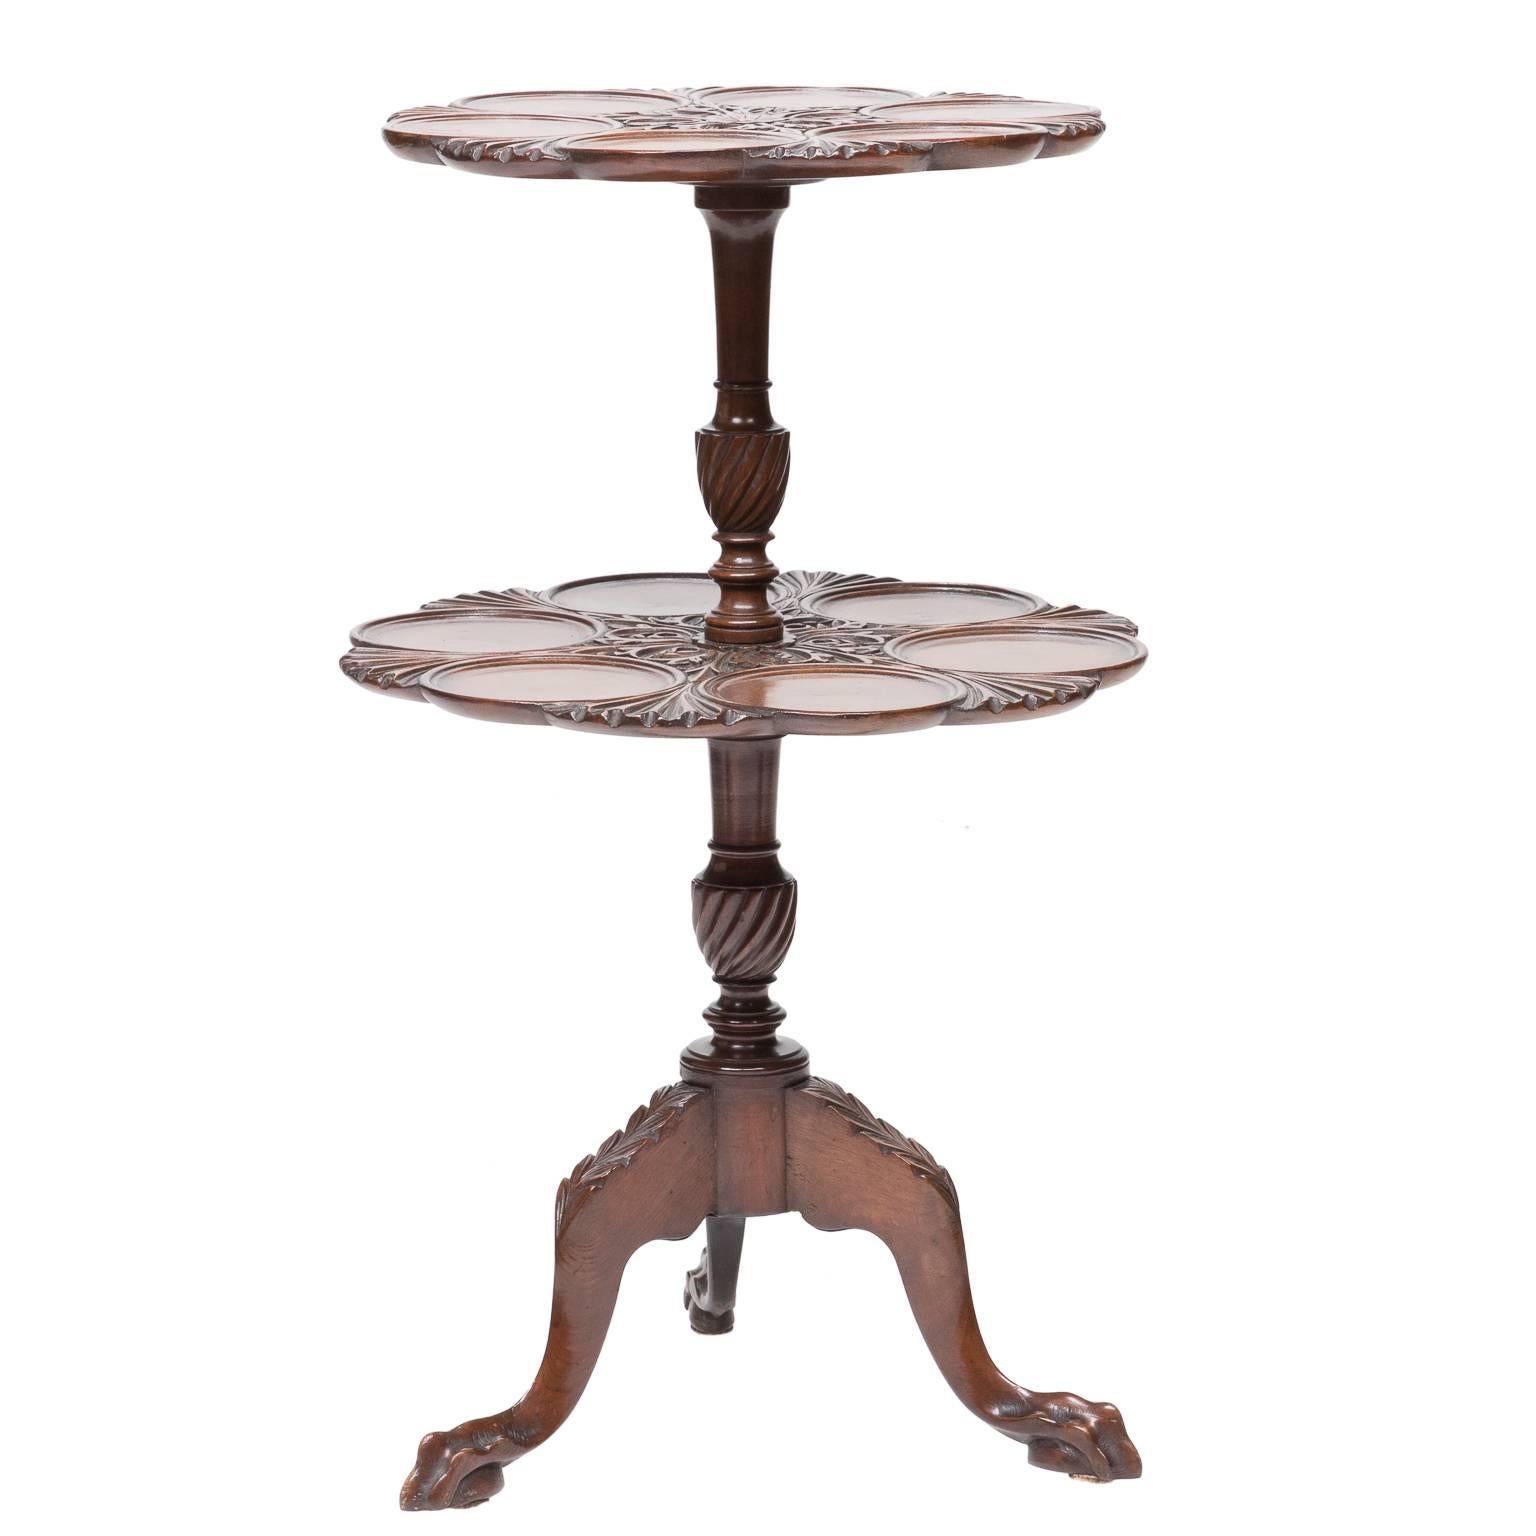 A Chippendale mahogany two-tier dessert side table. Shaped edges to the shelves, well-carved tops, and round plate holders. Resting on a tripod base and ending with a claw and ball foot. Acanthus leaf carvings to each knee of the legs. Finely turned